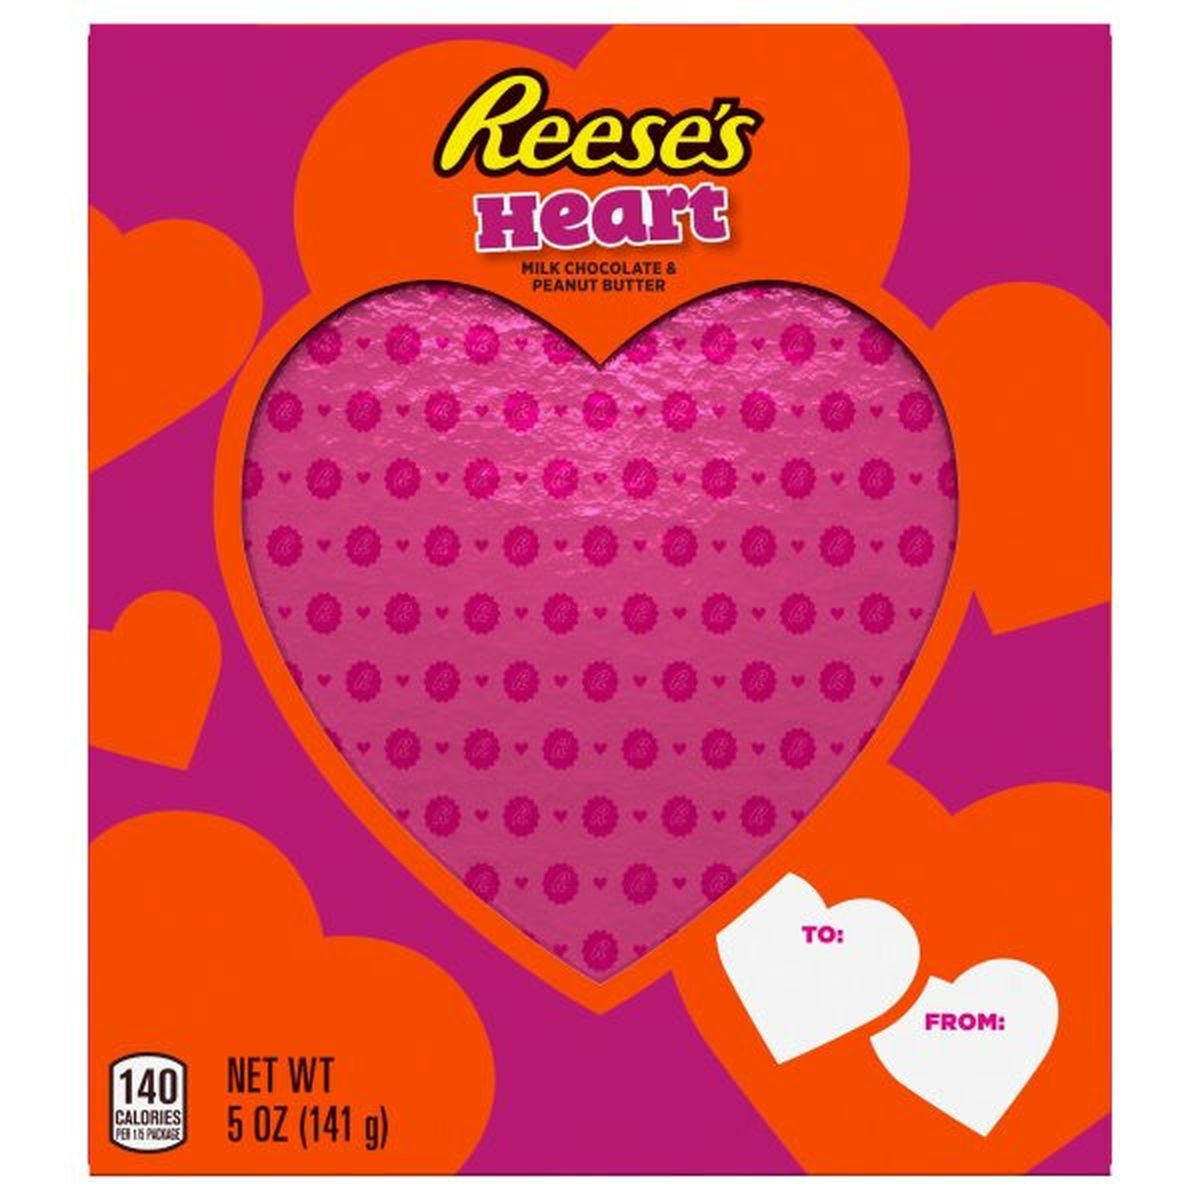 Calories in Reese's Milk Chocolate, Peanut Butter, Heart